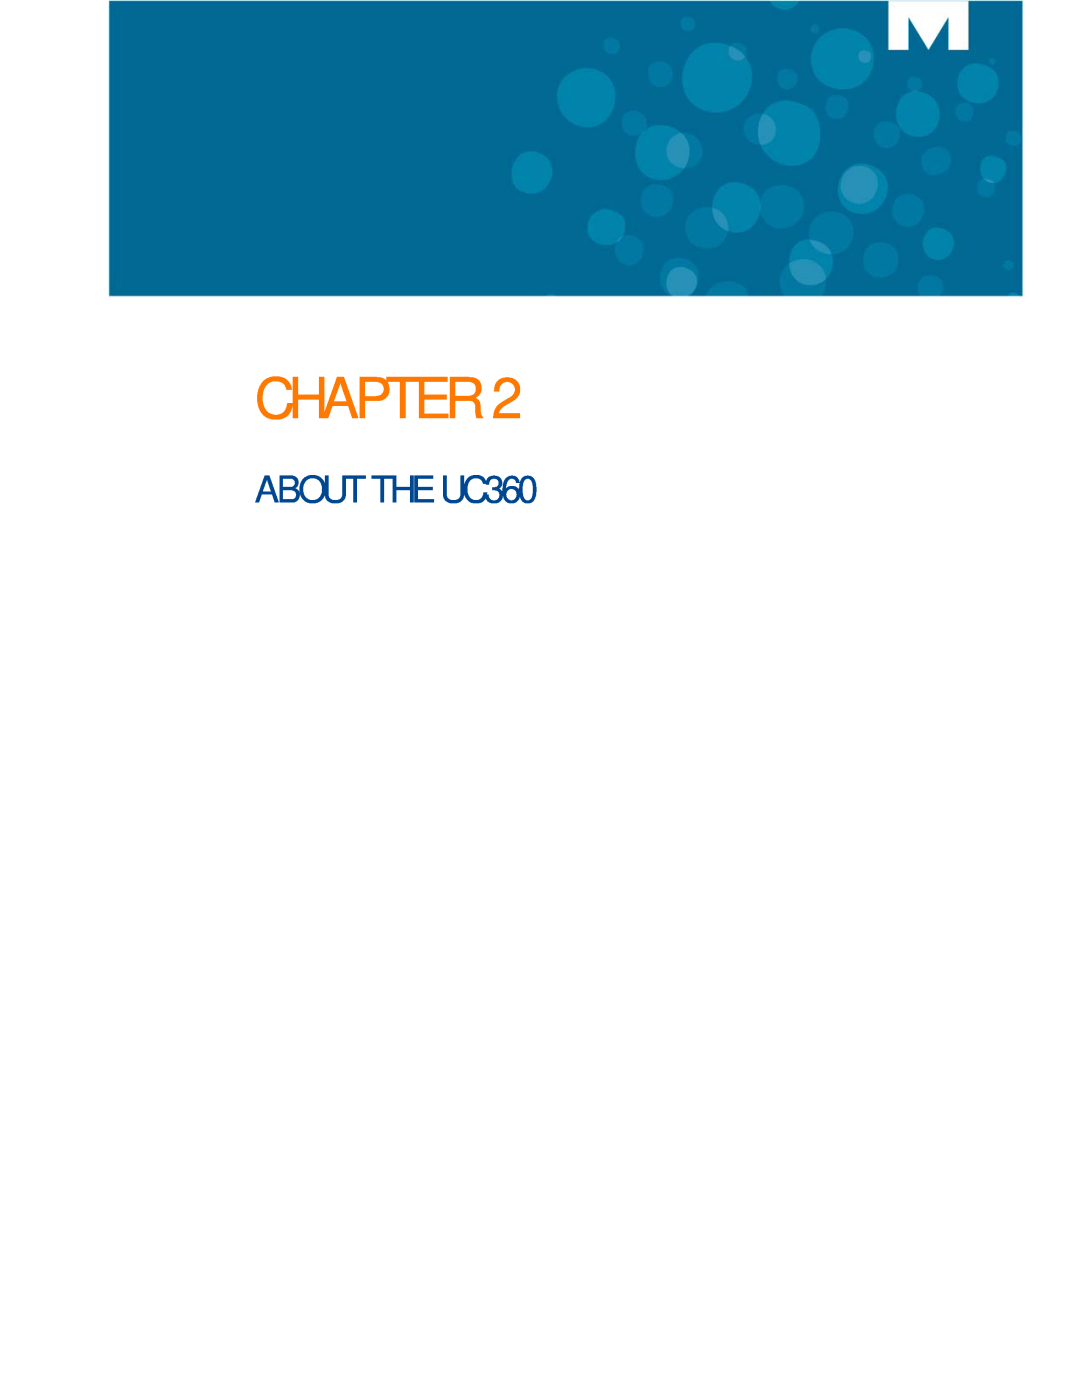 Mitel manual ABOUT THE UC360, Chapter 